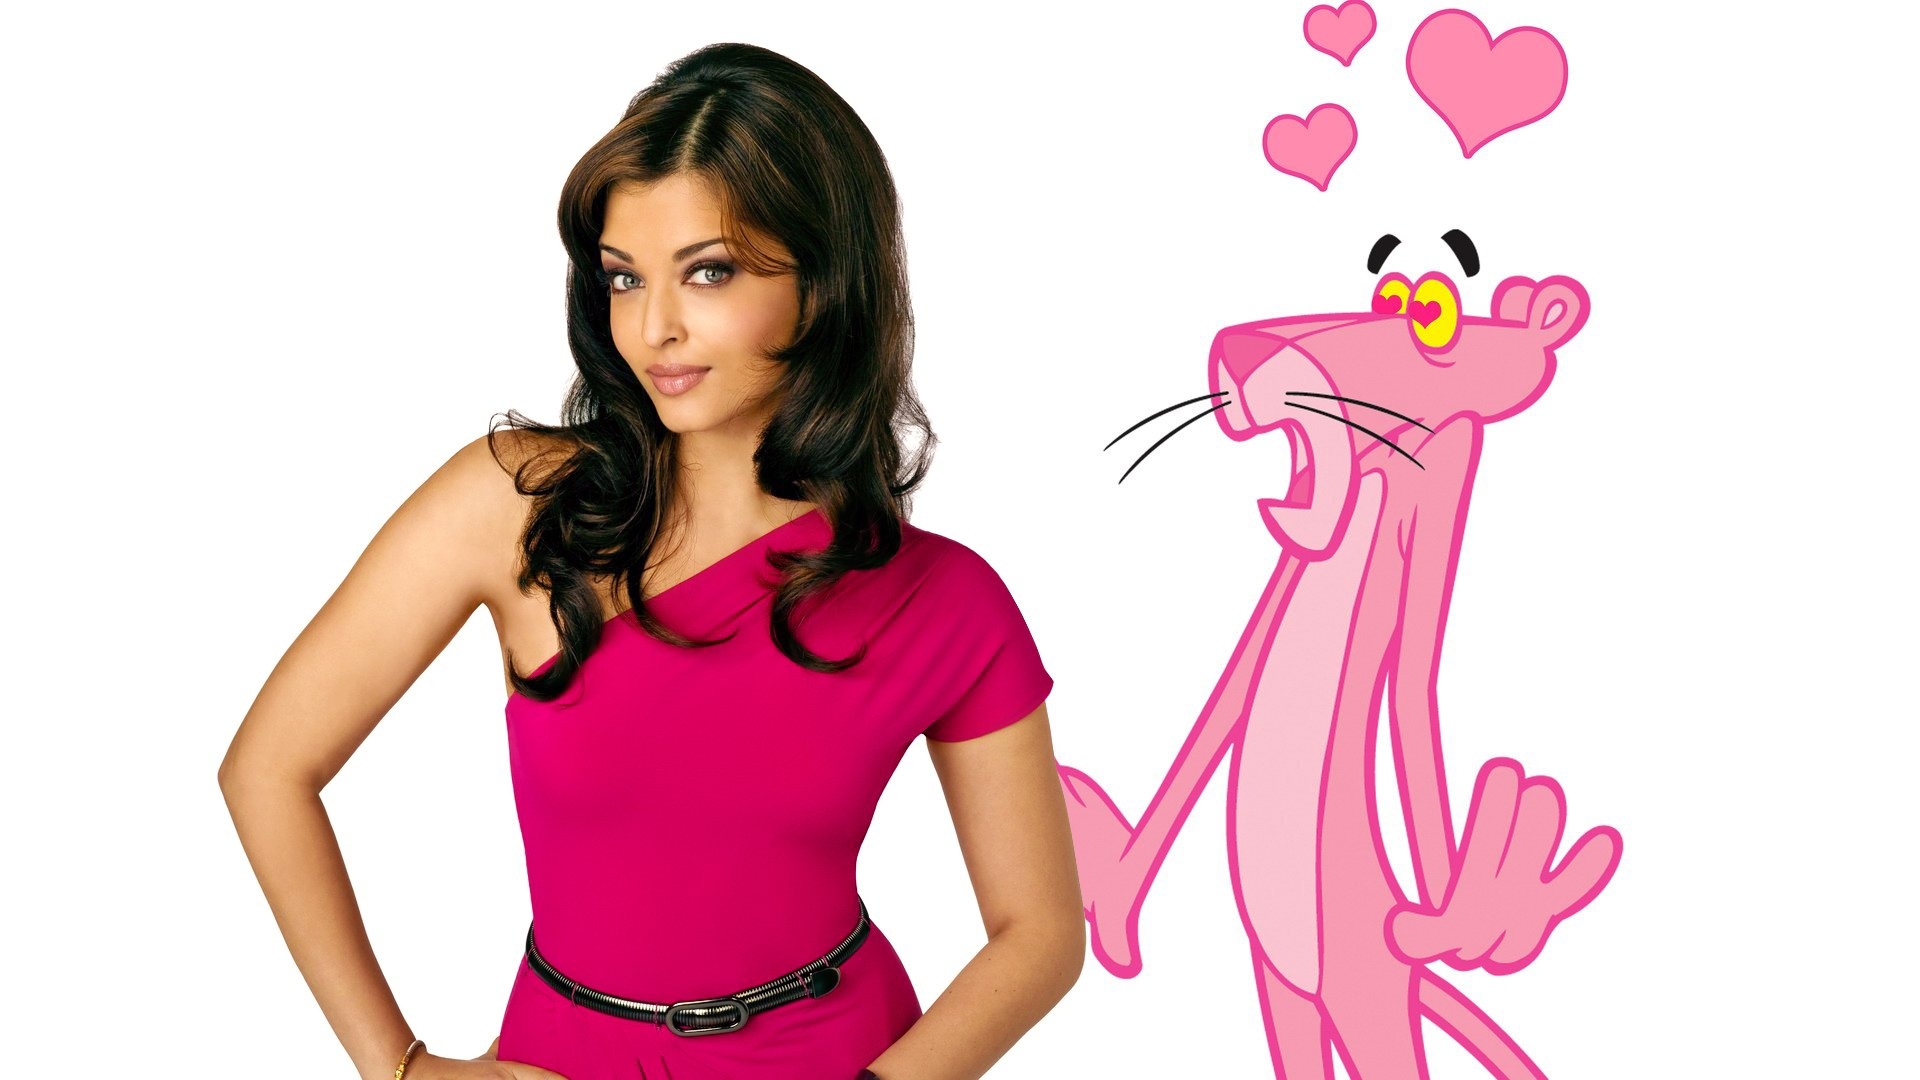 The Pink Panther 2, Sleek visuals, Funny hijinks, Memorable movie moments, 1920x1080 Full HD Desktop